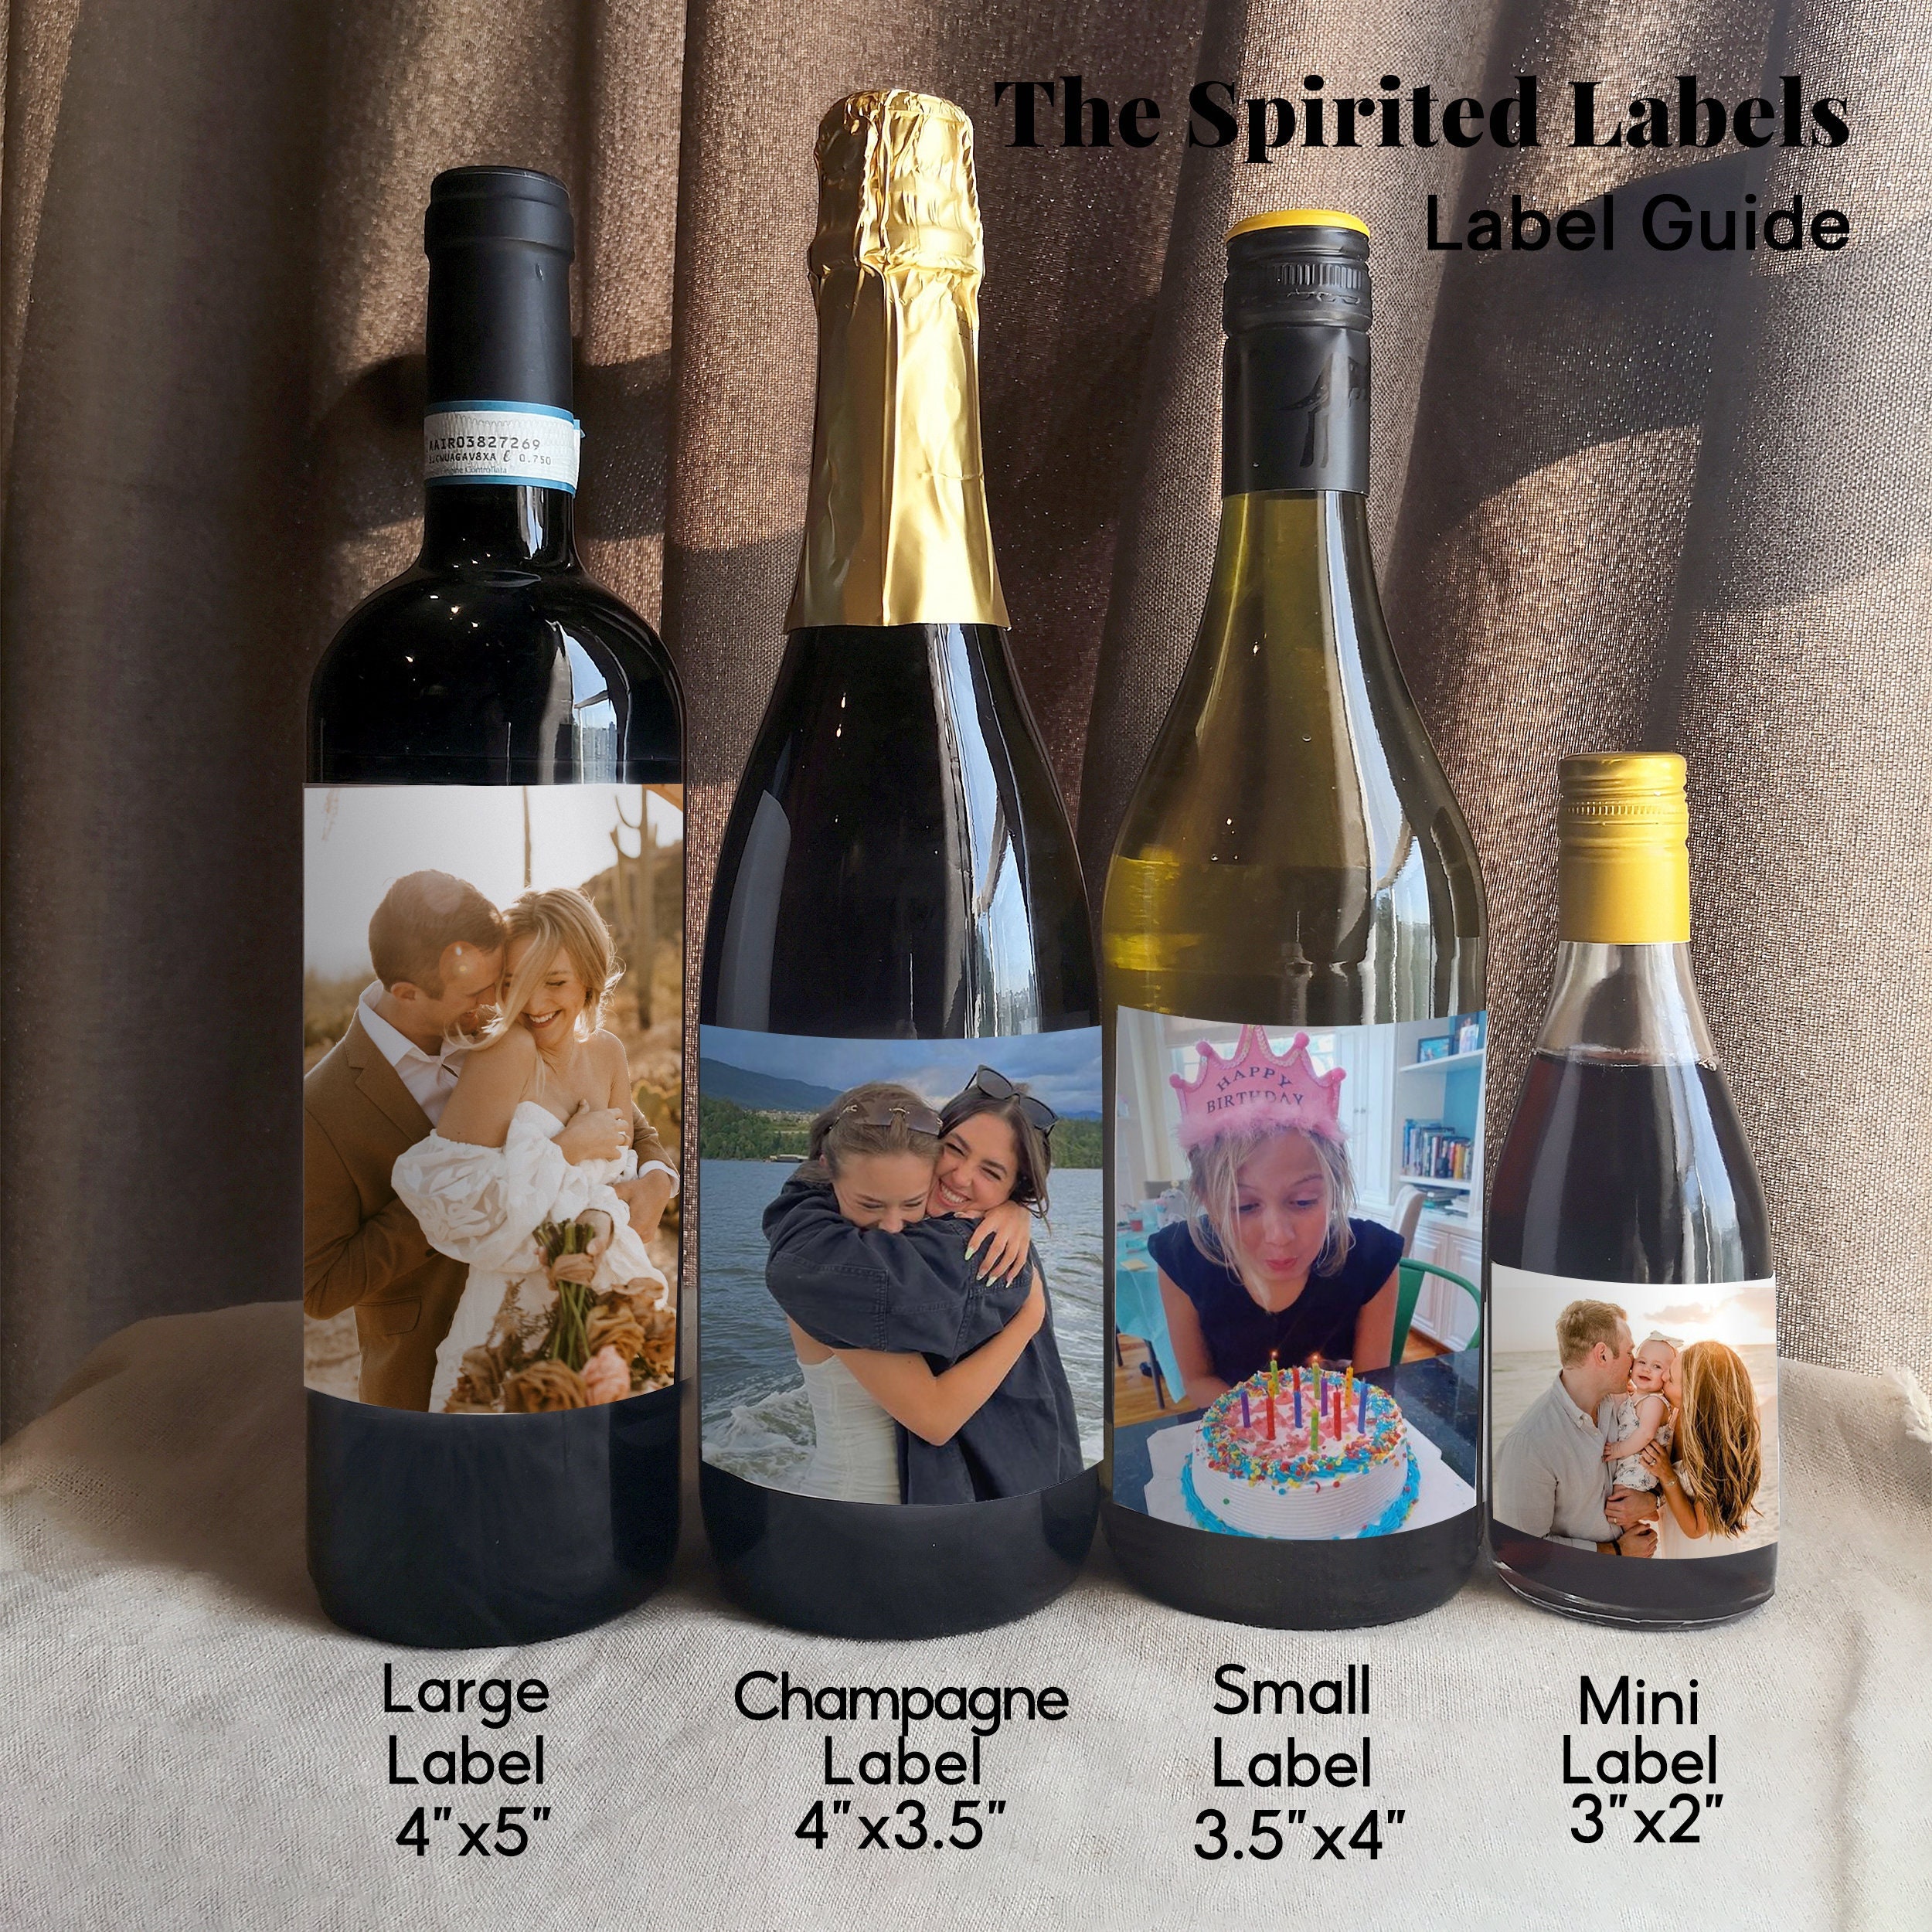 5 Wedding Anniversary Wine Label Stickers For 20th 25th 30th 40th 50th Gift  Ideas, Best Funny Cute Romantic Marriage Couple Presents For Him or Her